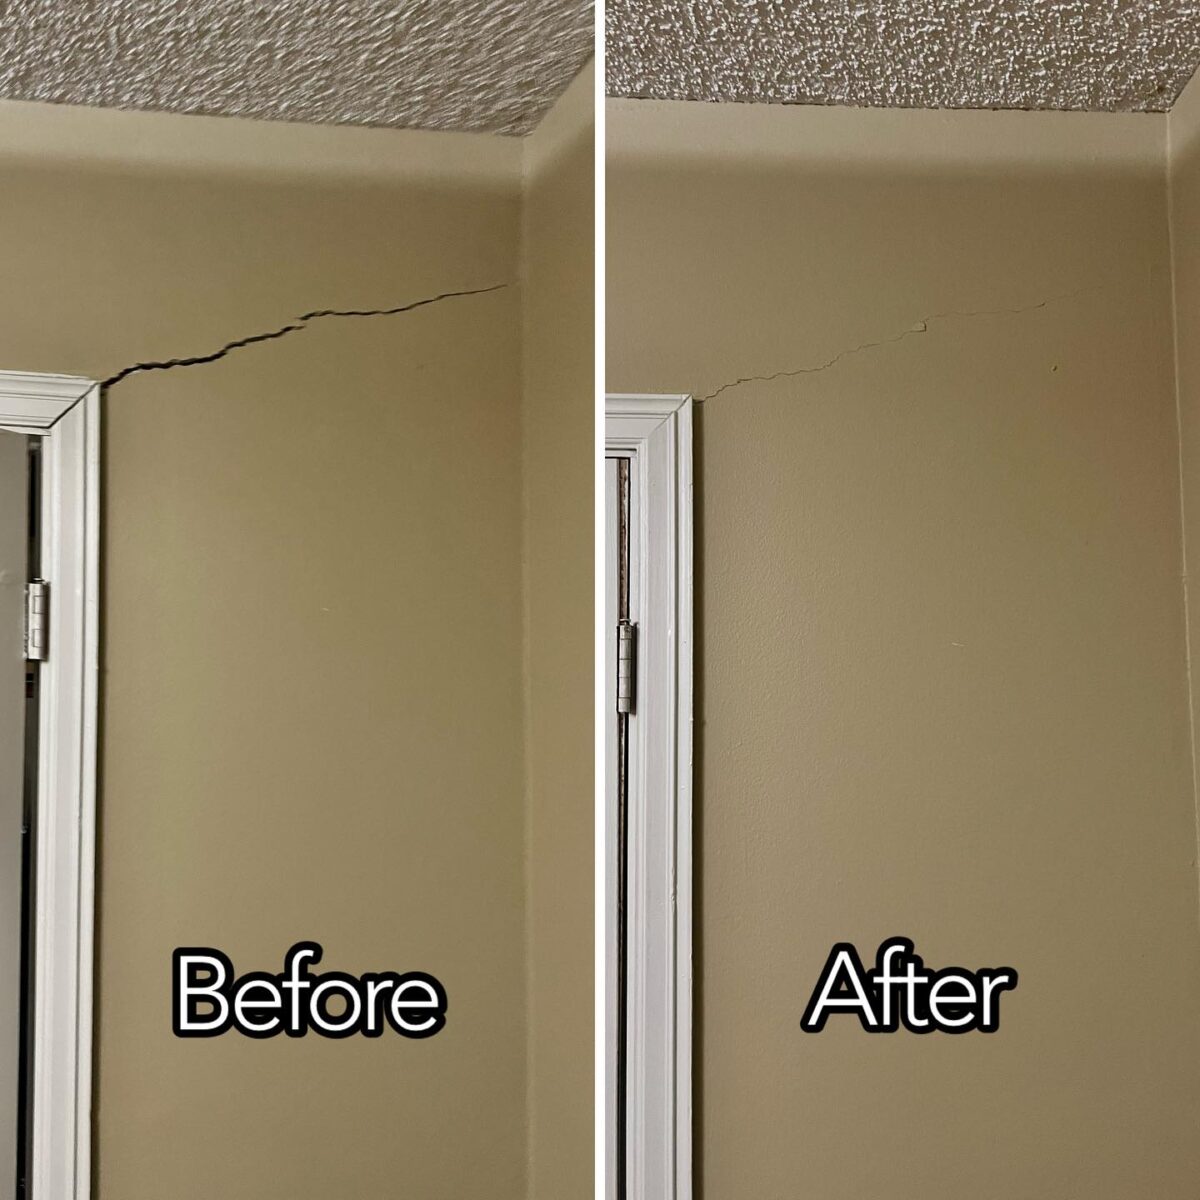 A before and after picture of Prairieville foundation repair minimizing cracks in a homeowner's walls.